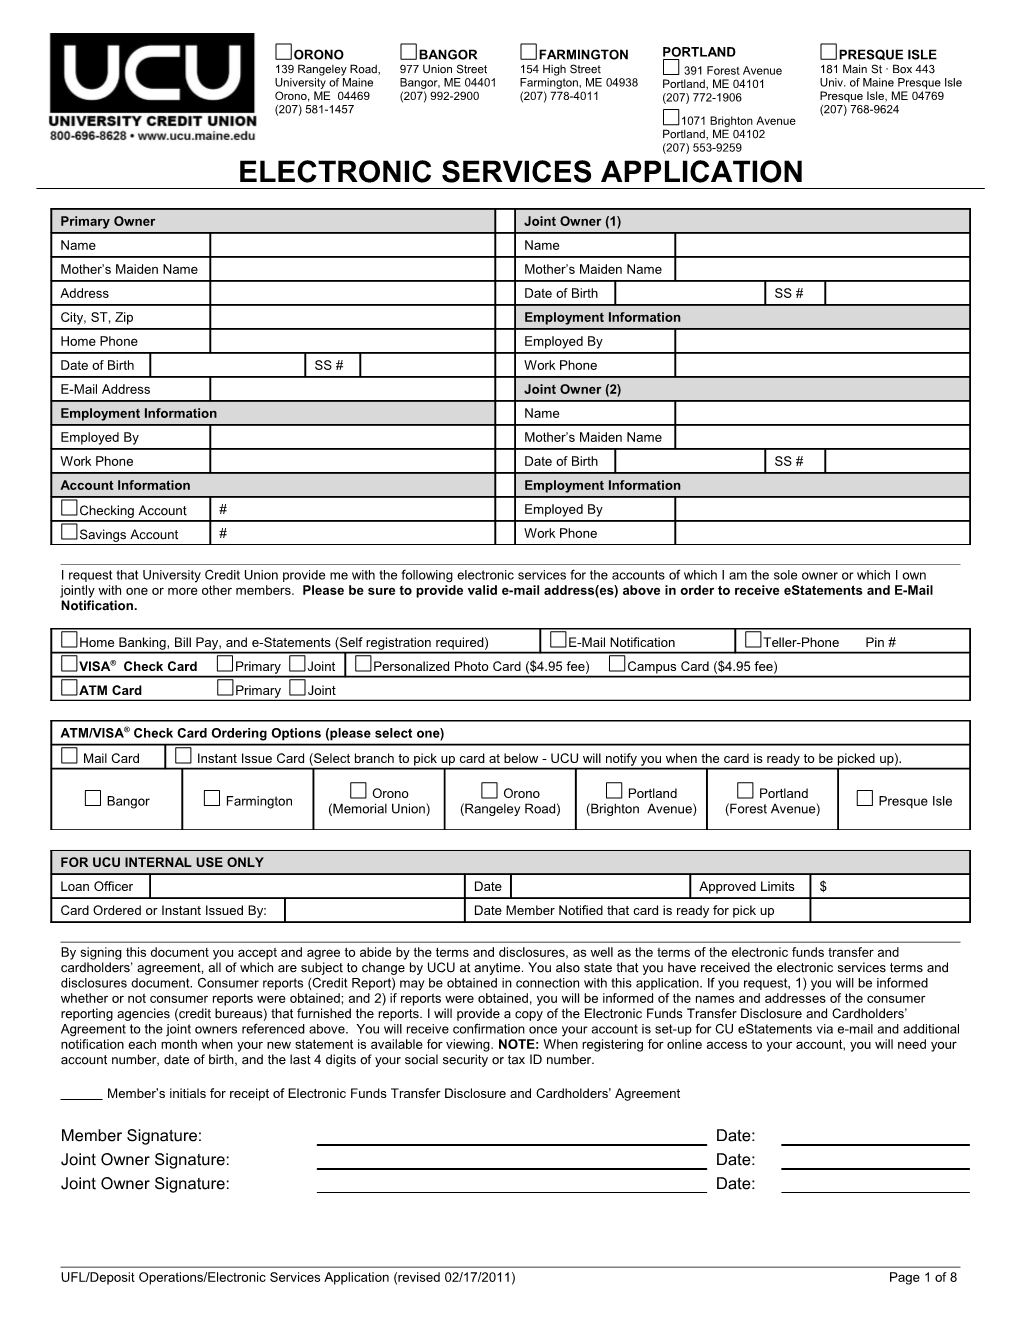 Electronic Services Application